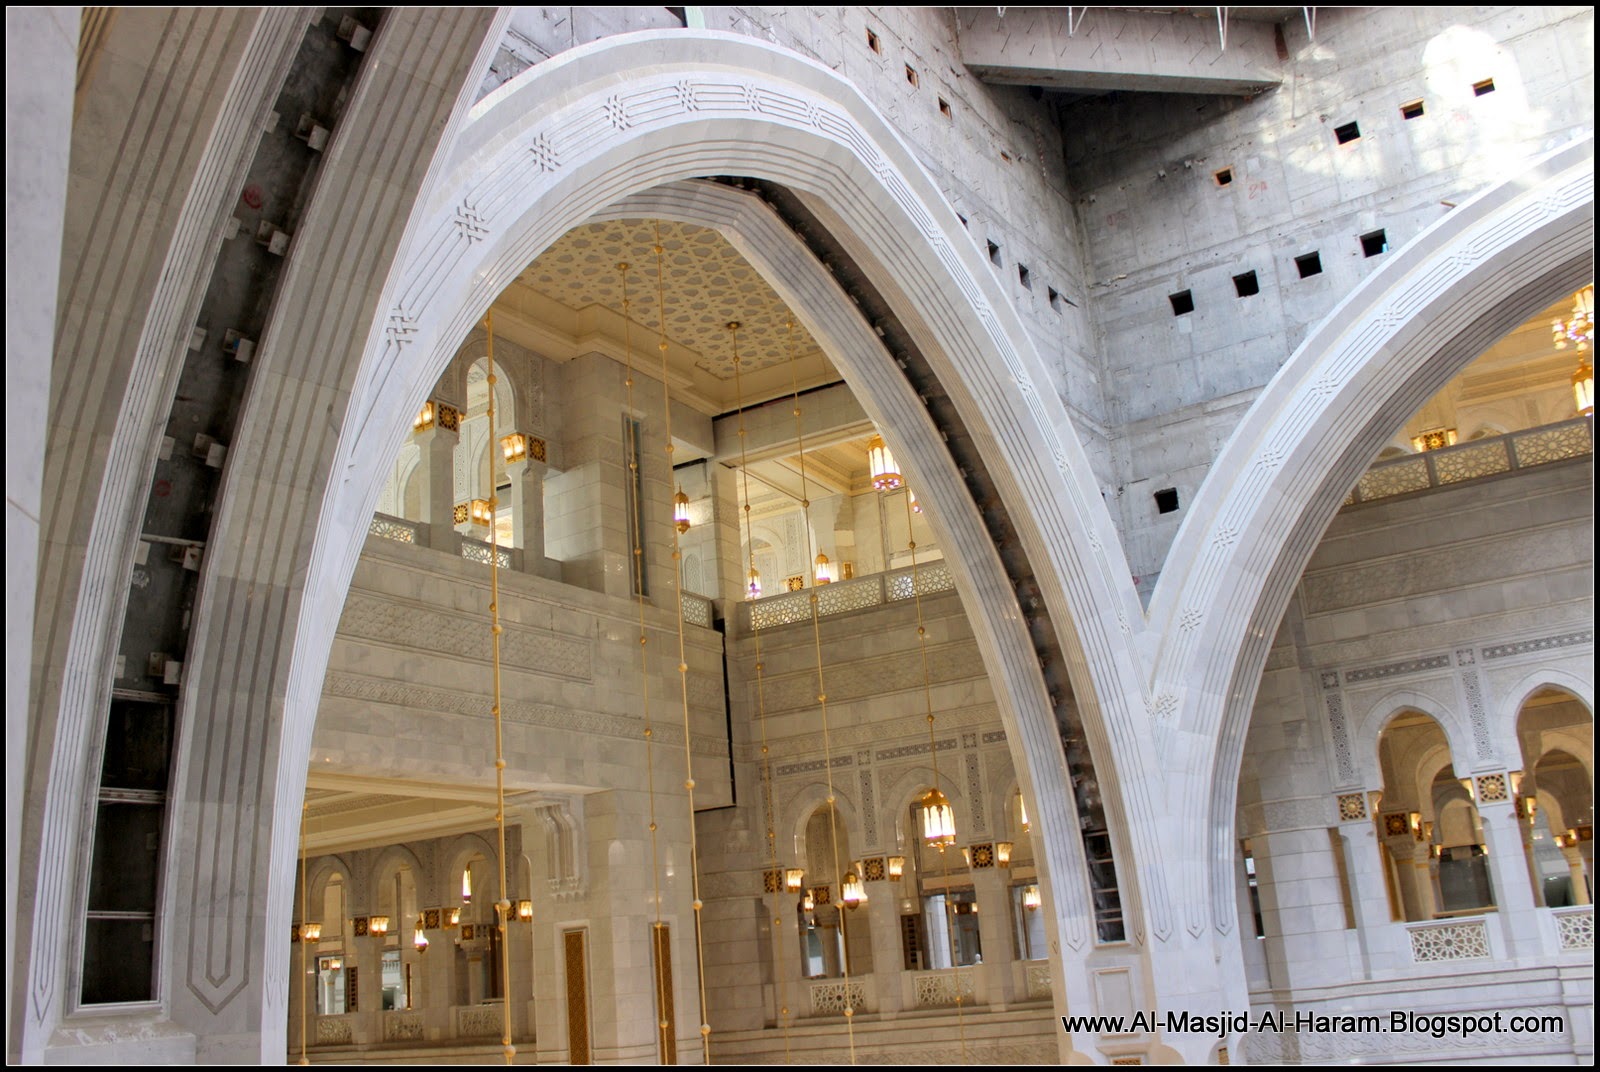 Pictures of Al Masjid Al Haram: New Expansion Project of Masjid Al